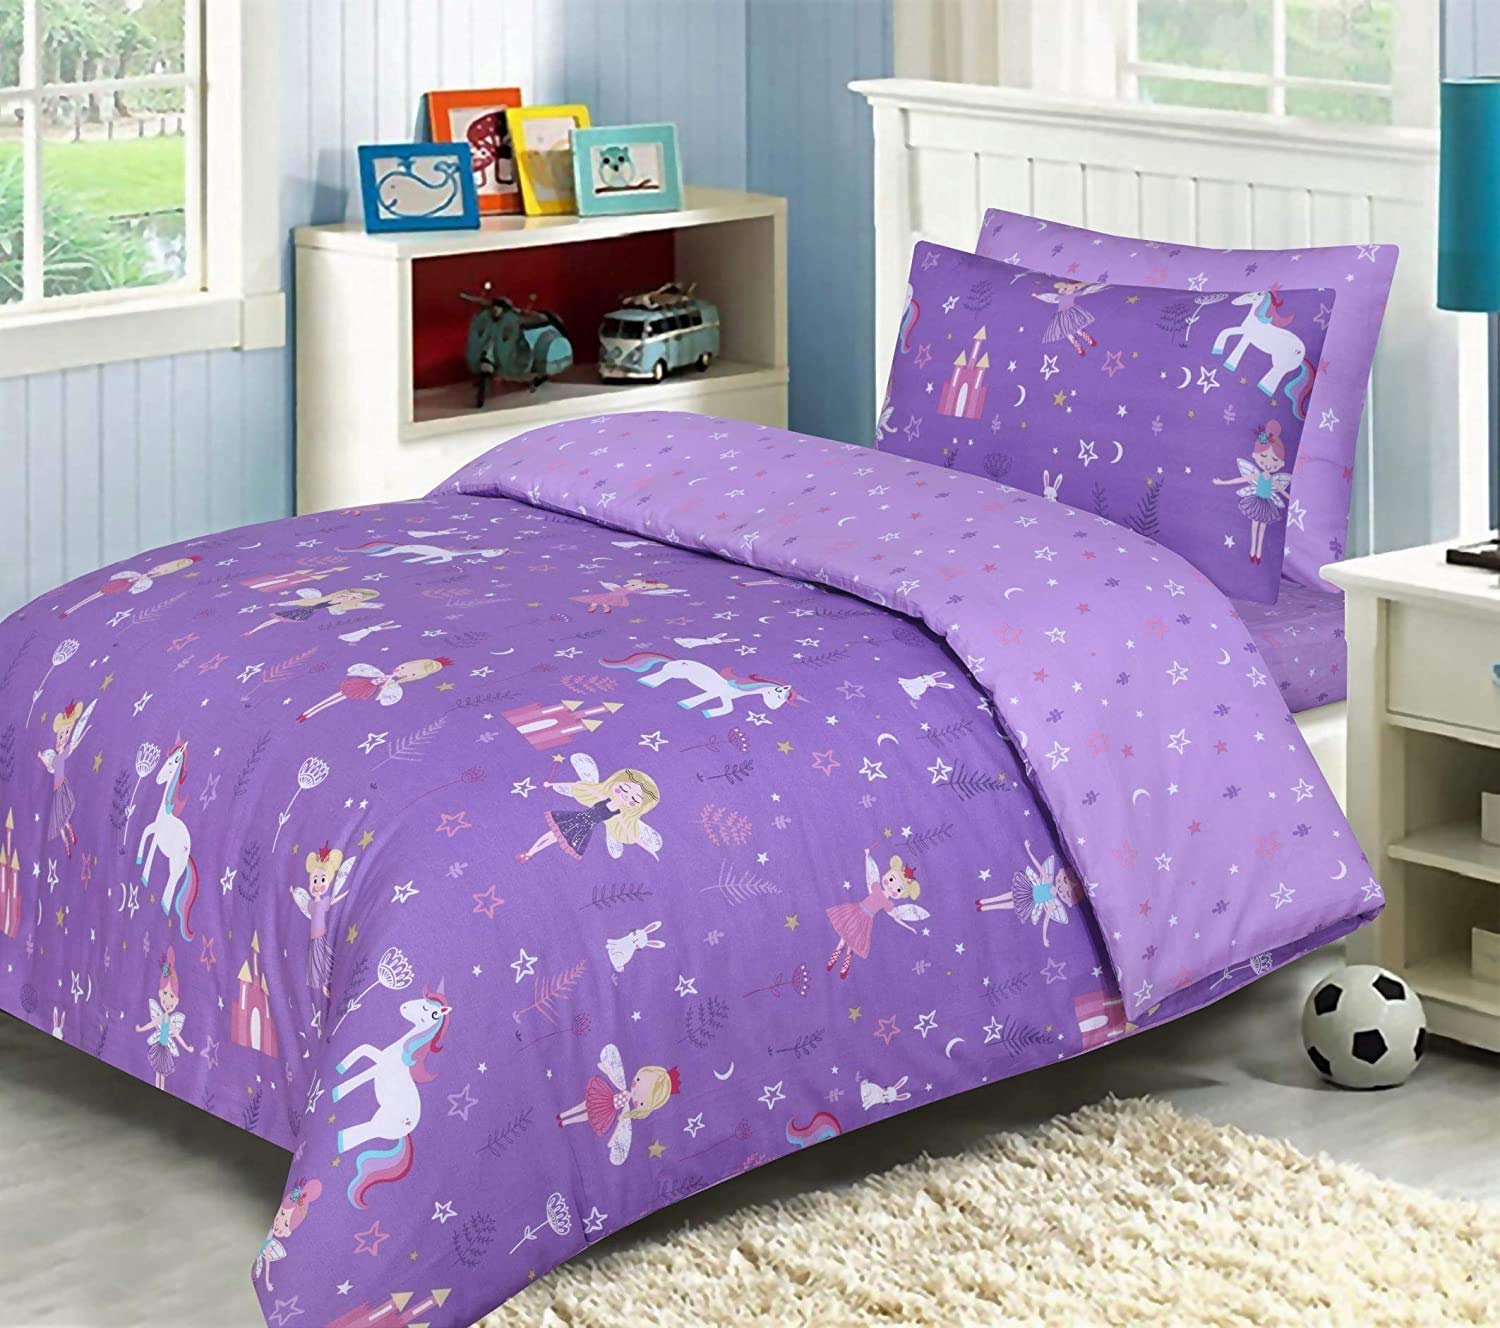 Indus Textiles Girls Childrens Kids Complete Duvet Cover Sets - Fitted Sheet and Pillowcases Matching - 100% Soft Cotton - Reversible - Unicorn Purple - Single Complete Set